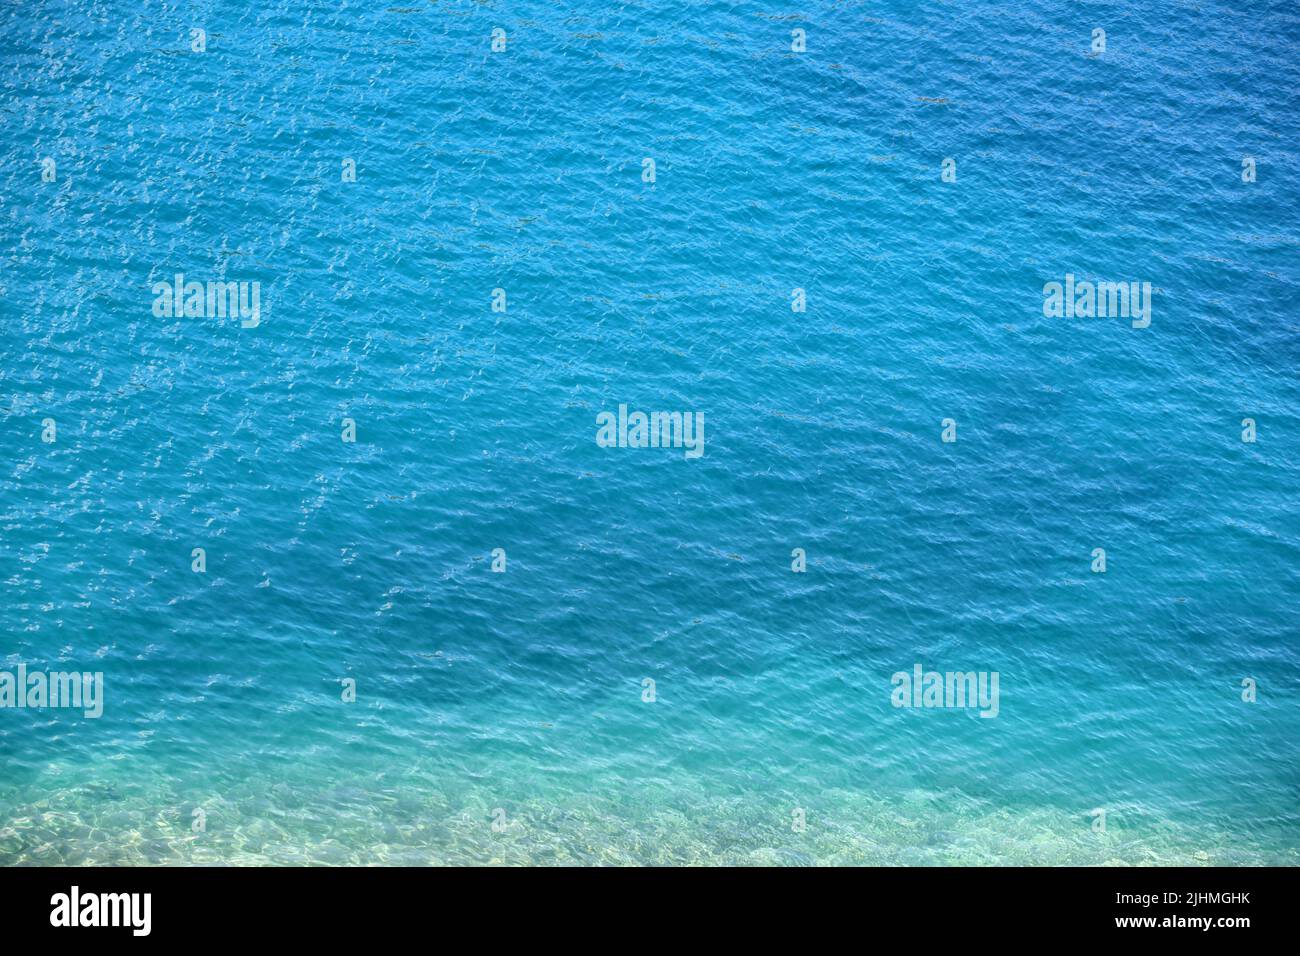 Blue sea water surface with stones on a bottom. Clear turquoise water for background Stock Photo